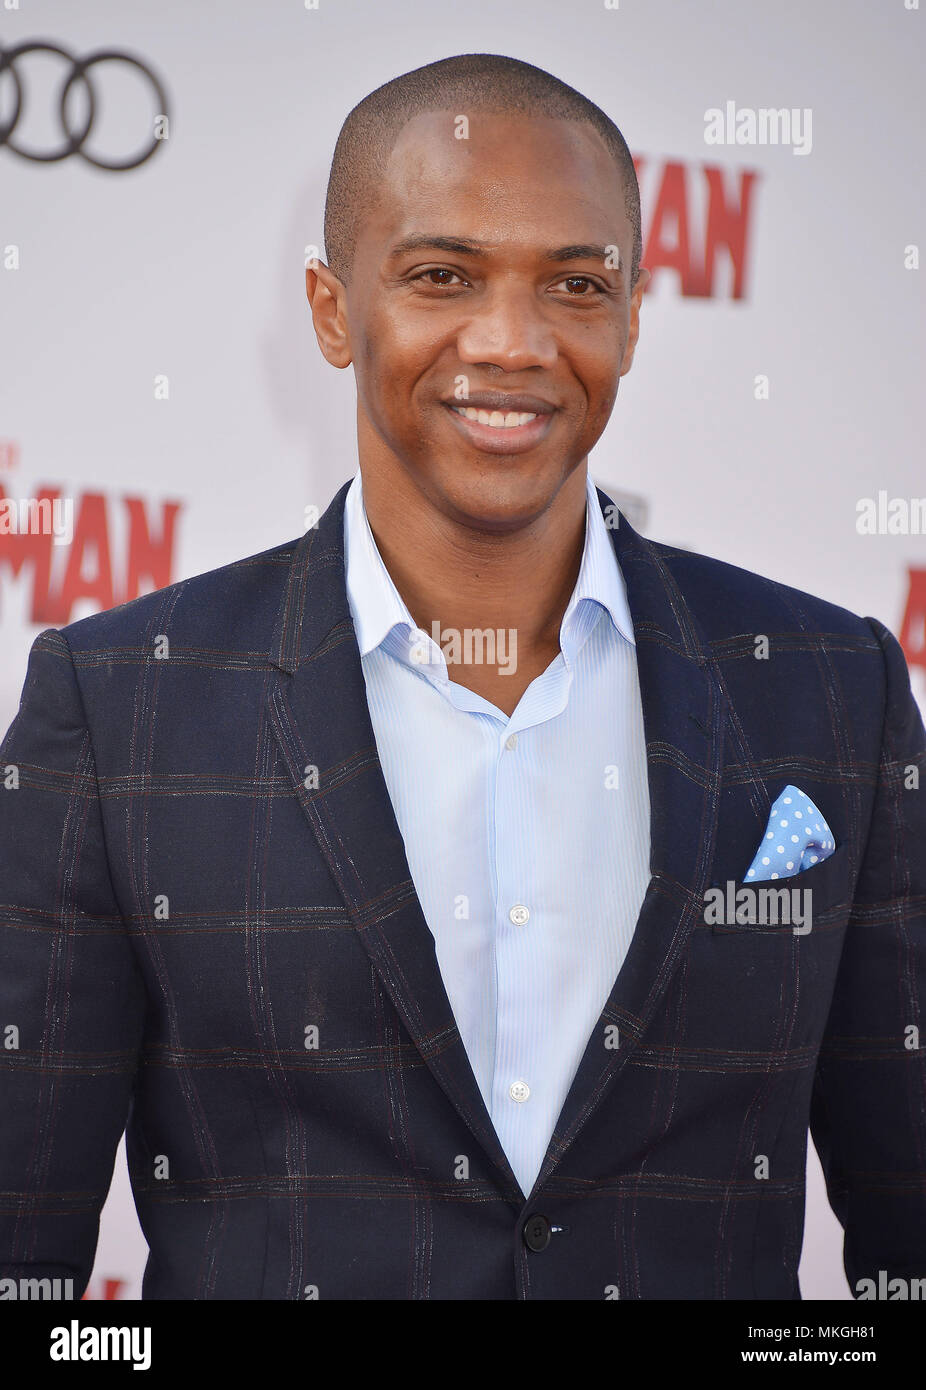 J. August Richards arriving at the Ant Man Premiere at the Dolby Theatre in Los Angeles. June 29 2015.J. August Richards  Event in Hollywood Life - California,  Red Carpet Event, Vertical, USA, Film Industry, Celebrities,  Photography, Bestof, Arts Culture and Entertainment, Topix Celebrities fashion / one person, Vertical, Best of, Hollywood Life, Event in Hollywood Life - California,  Red Carpet and backstage, USA, Film Industry, Celebrities,  movie celebrities, TV celebrities, Music celebrities, Photography, Bestof, Arts Culture and Entertainment,  Topix, headshot, vertical, from the year , Stock Photo